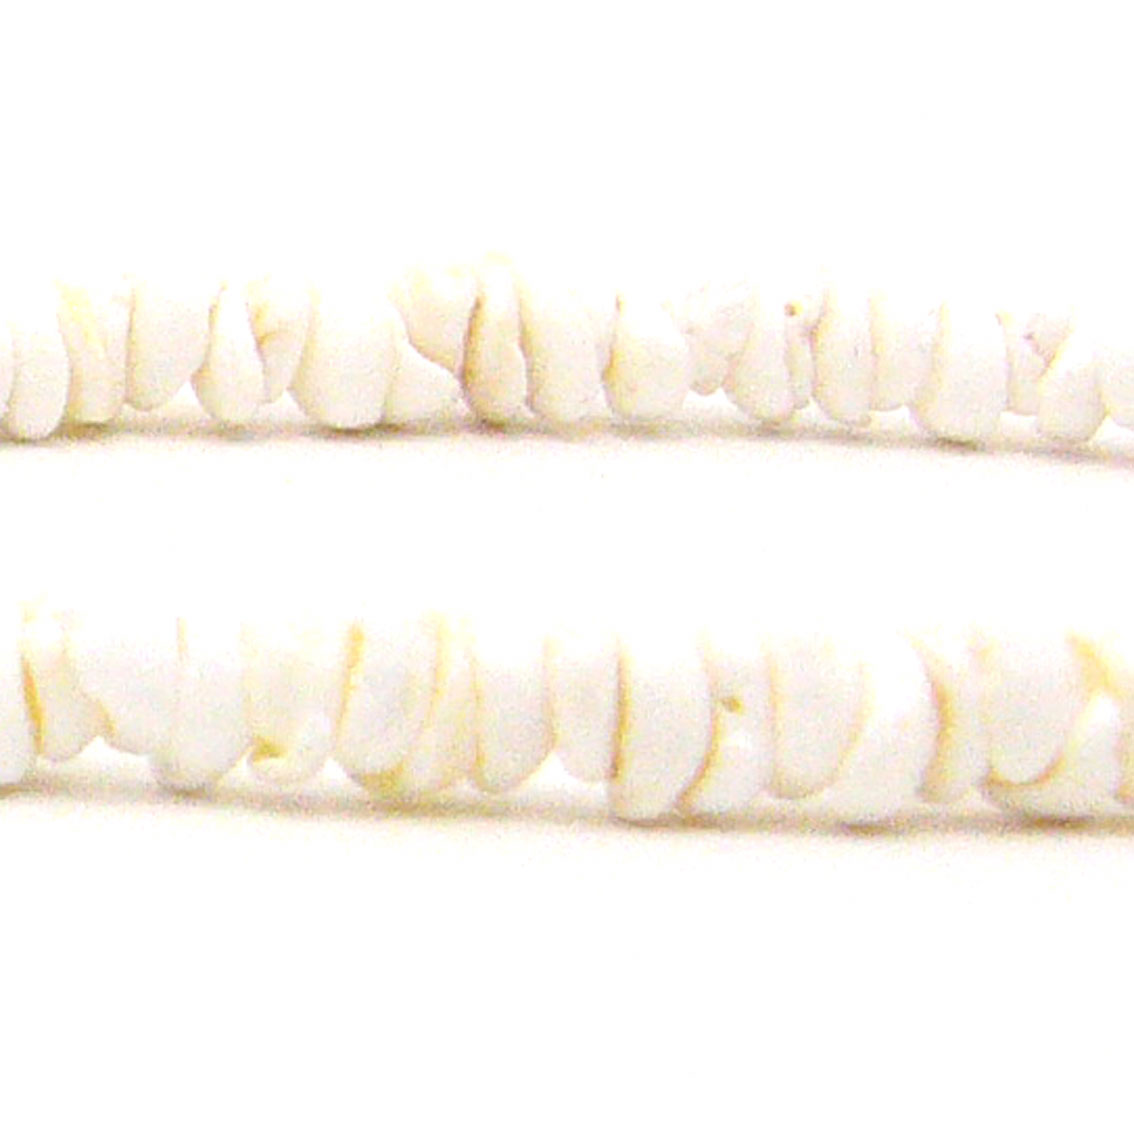 Puka Shell Necklace  XS(40cm)^nCAANZT[^VF^VFlbNXEy_g